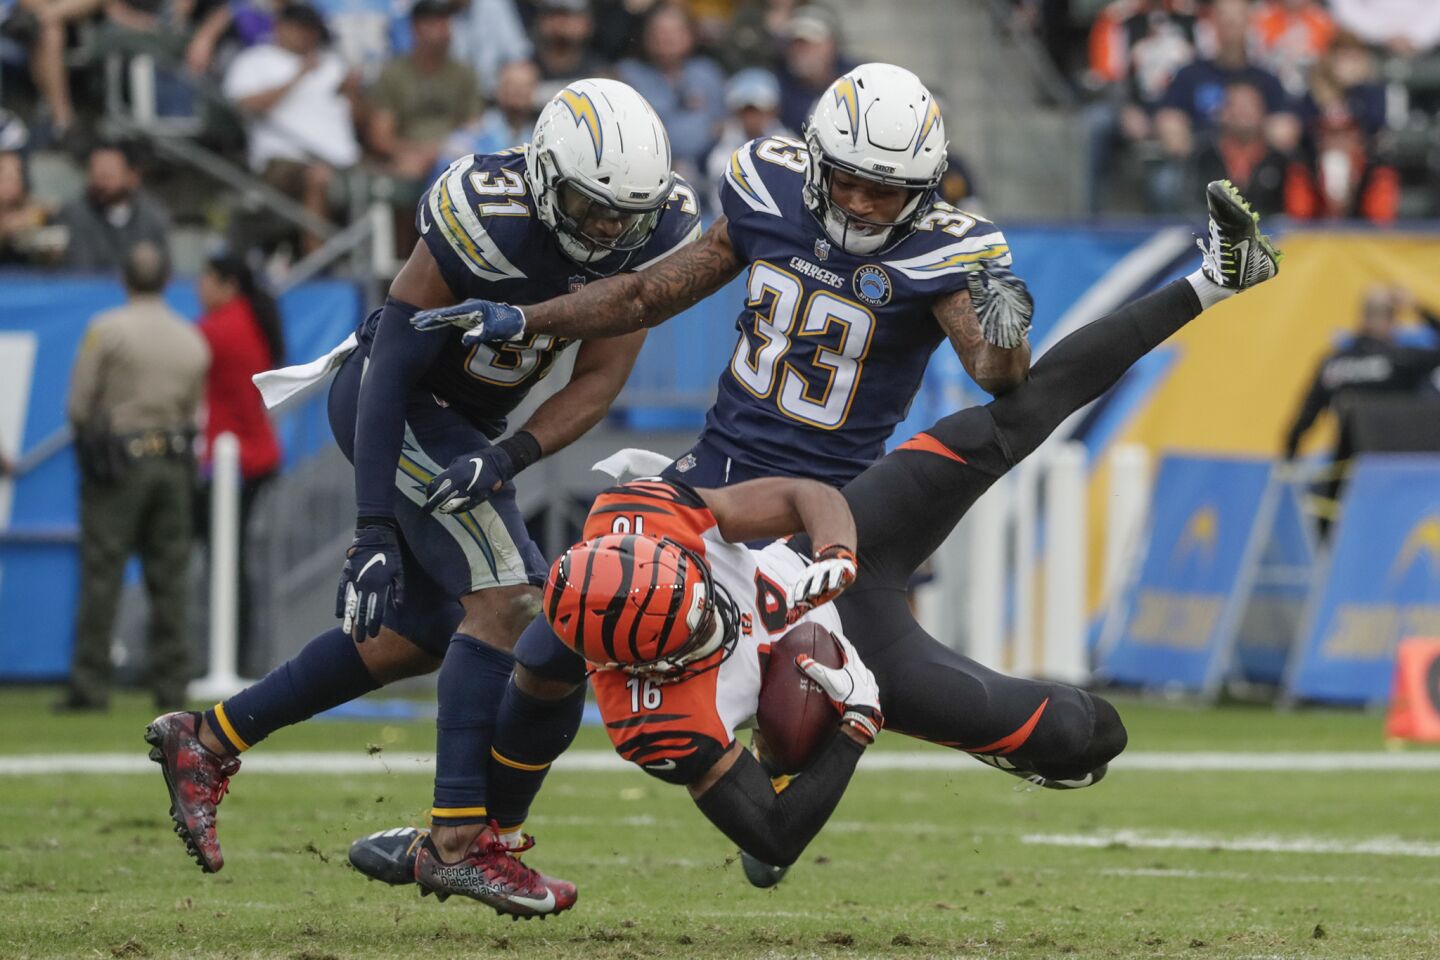 Chargers safety Derwin James upends Bengals receiver Cody Core during the third quarter drive.